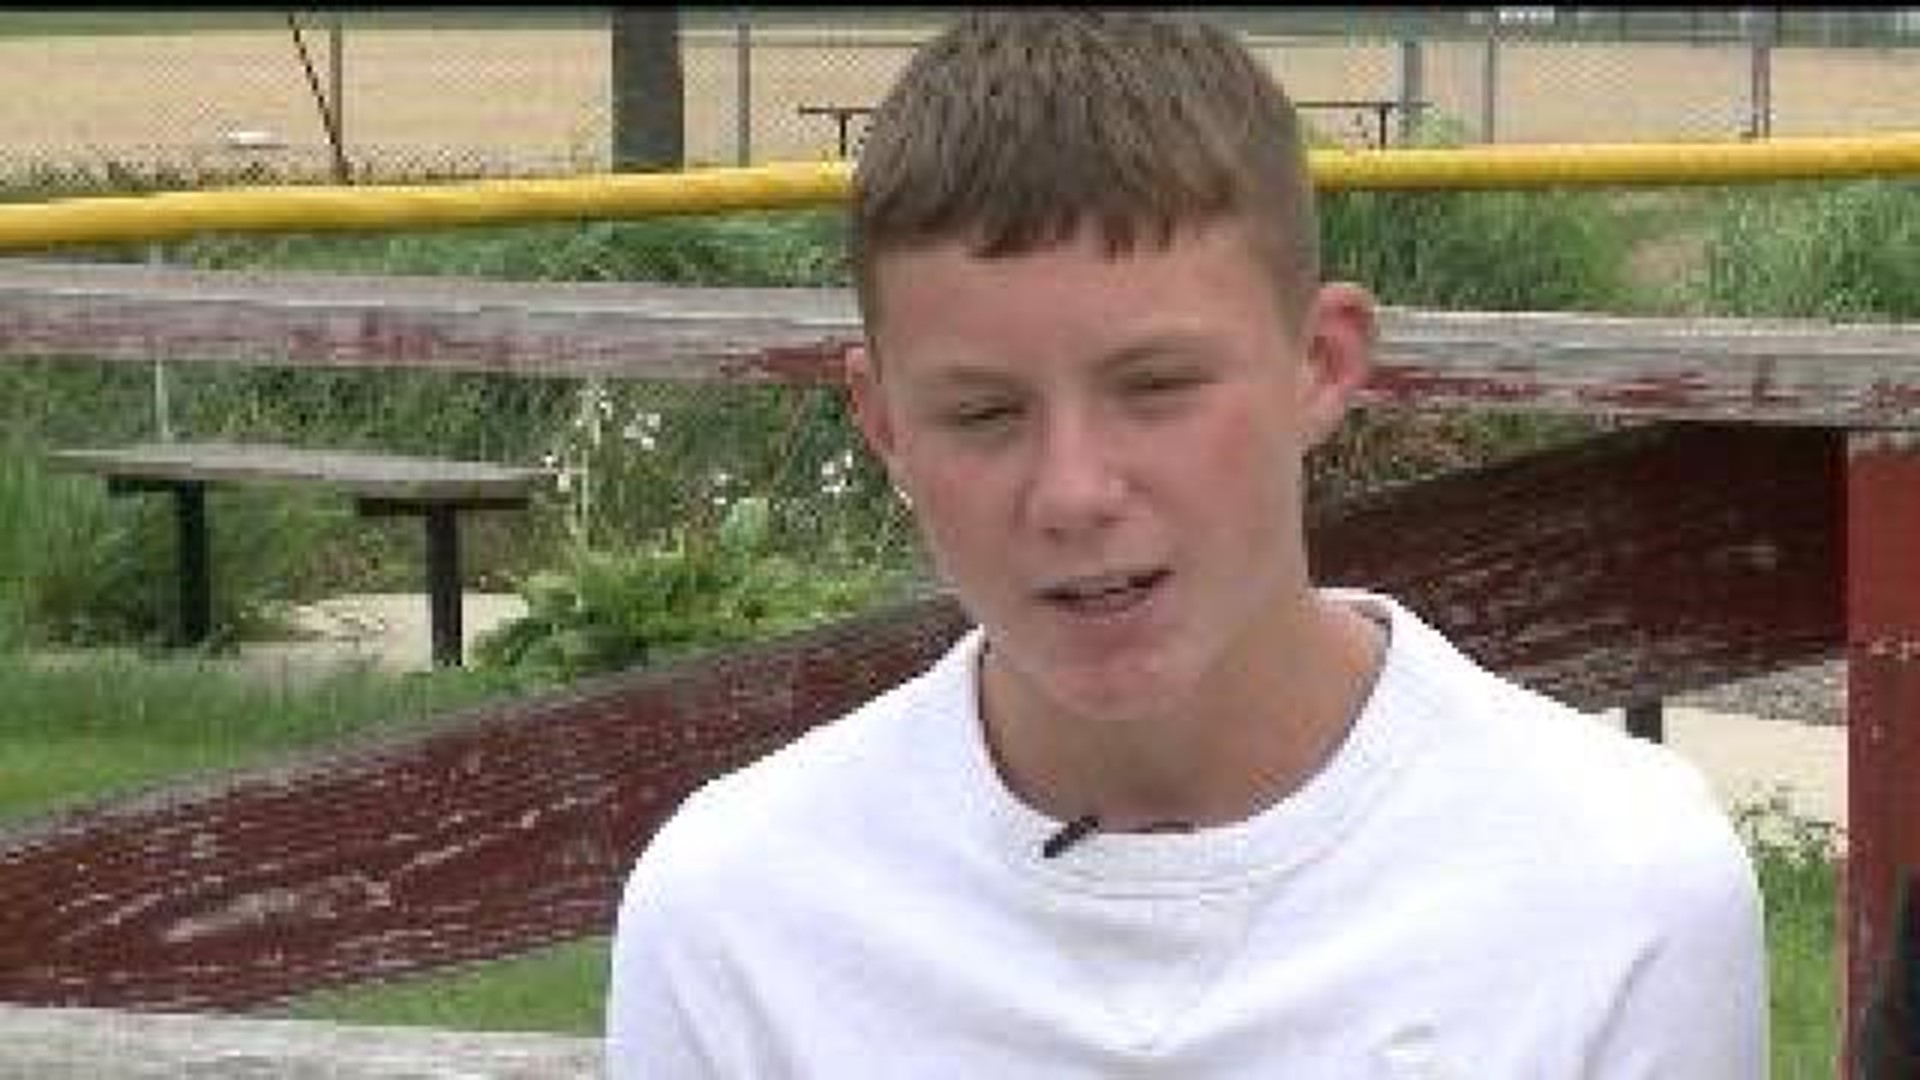 Teen explains how he fought off man who tried to kidnap him